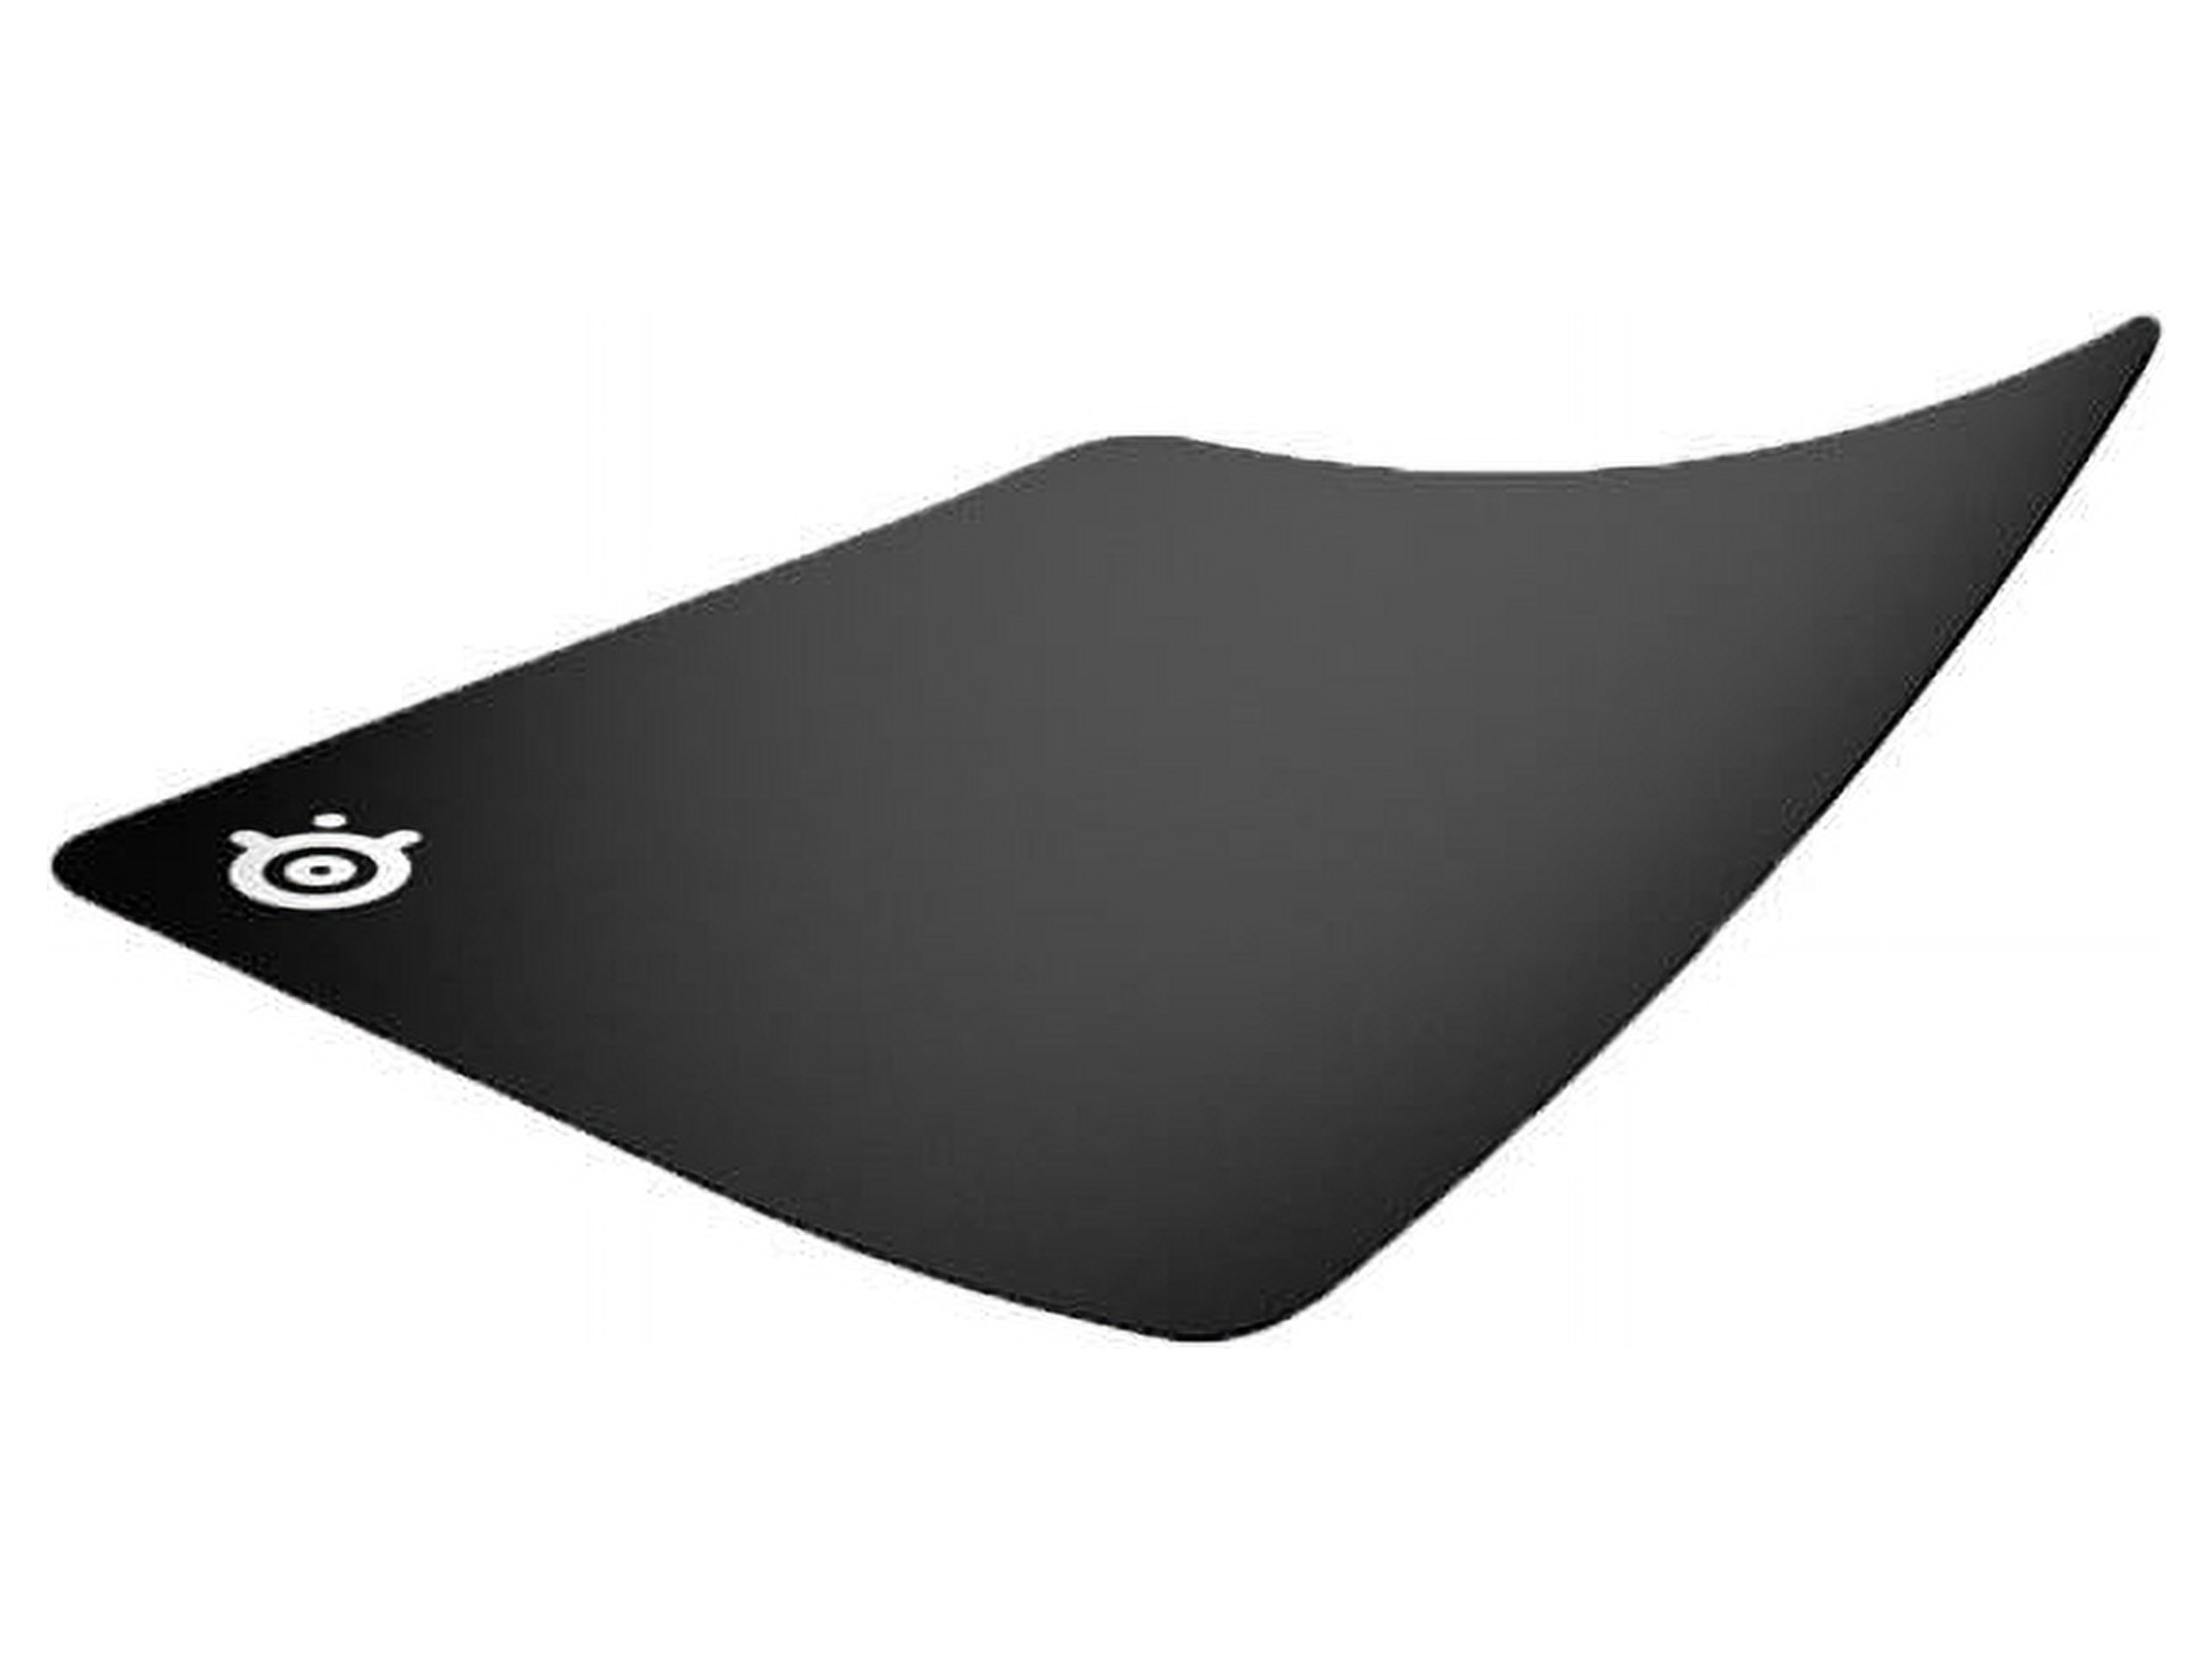 SteelSeries QcK+ Mouse Pad - image 4 of 6